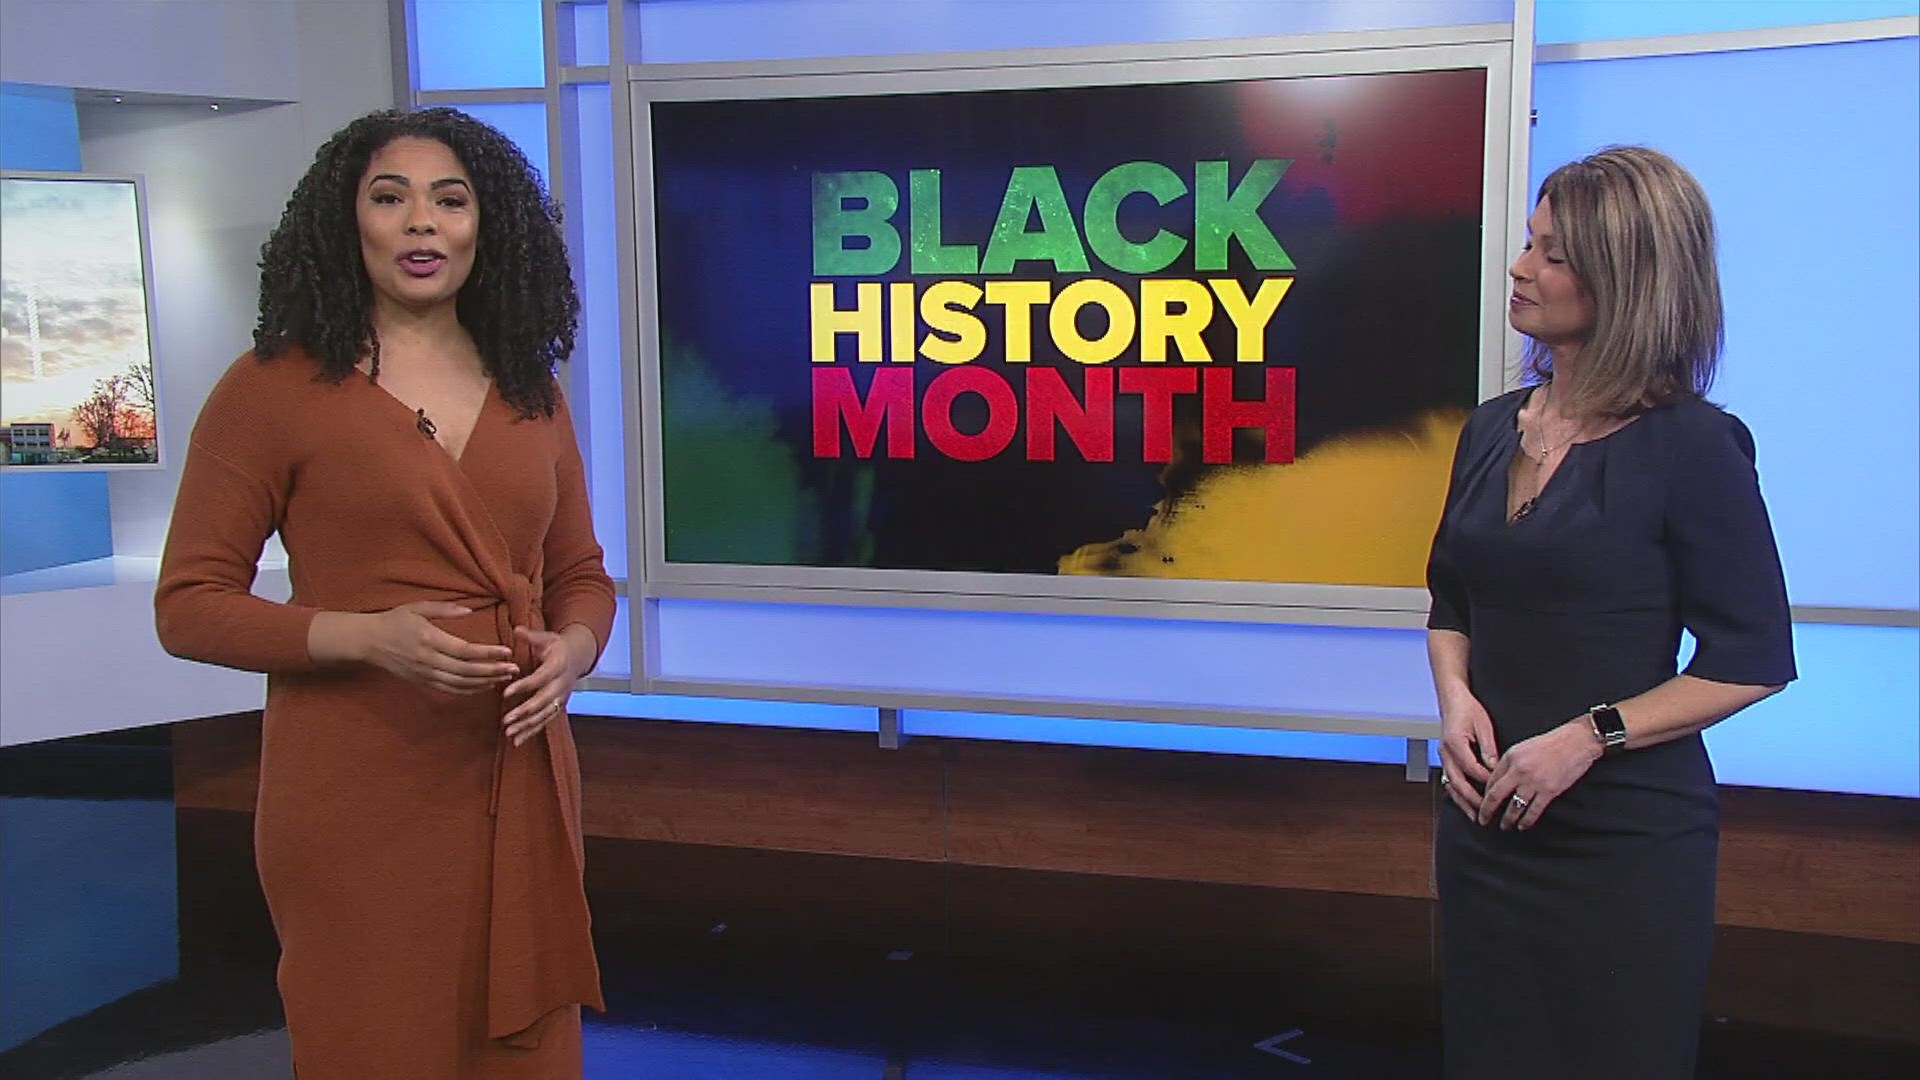 Central Indiana has no shortage of Black cultural leaders making positive impacts on their communities. 13News is highlighting several of them throughout February.